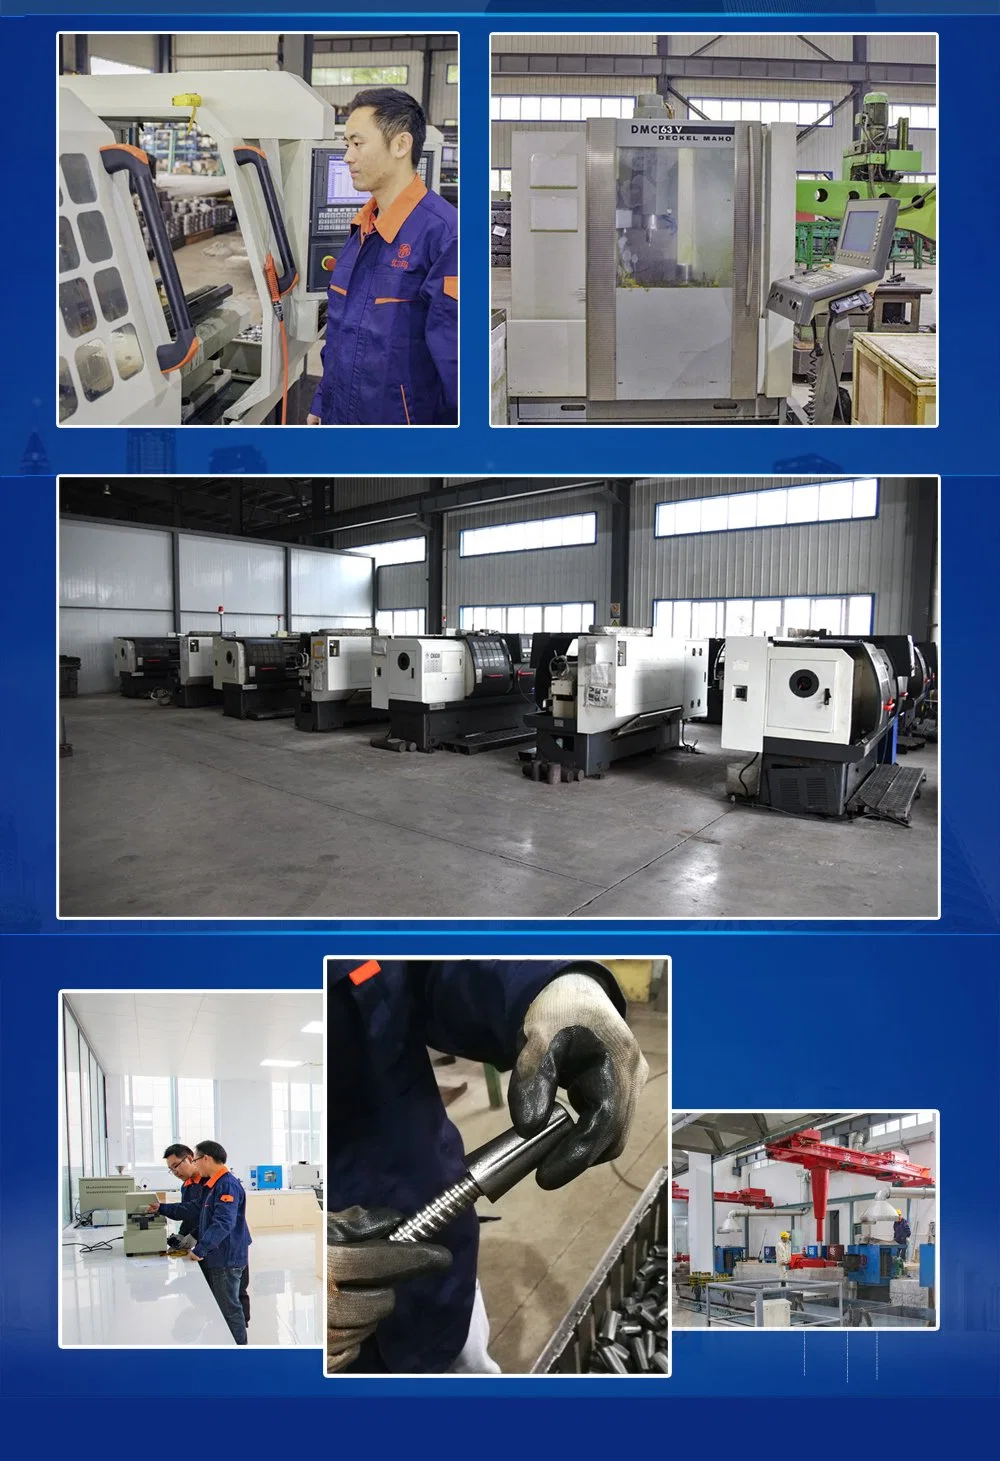 Machining, Equipment, Lighting, Construction, Power Fitting, Nuts, Underground, Accessories, E-Coated